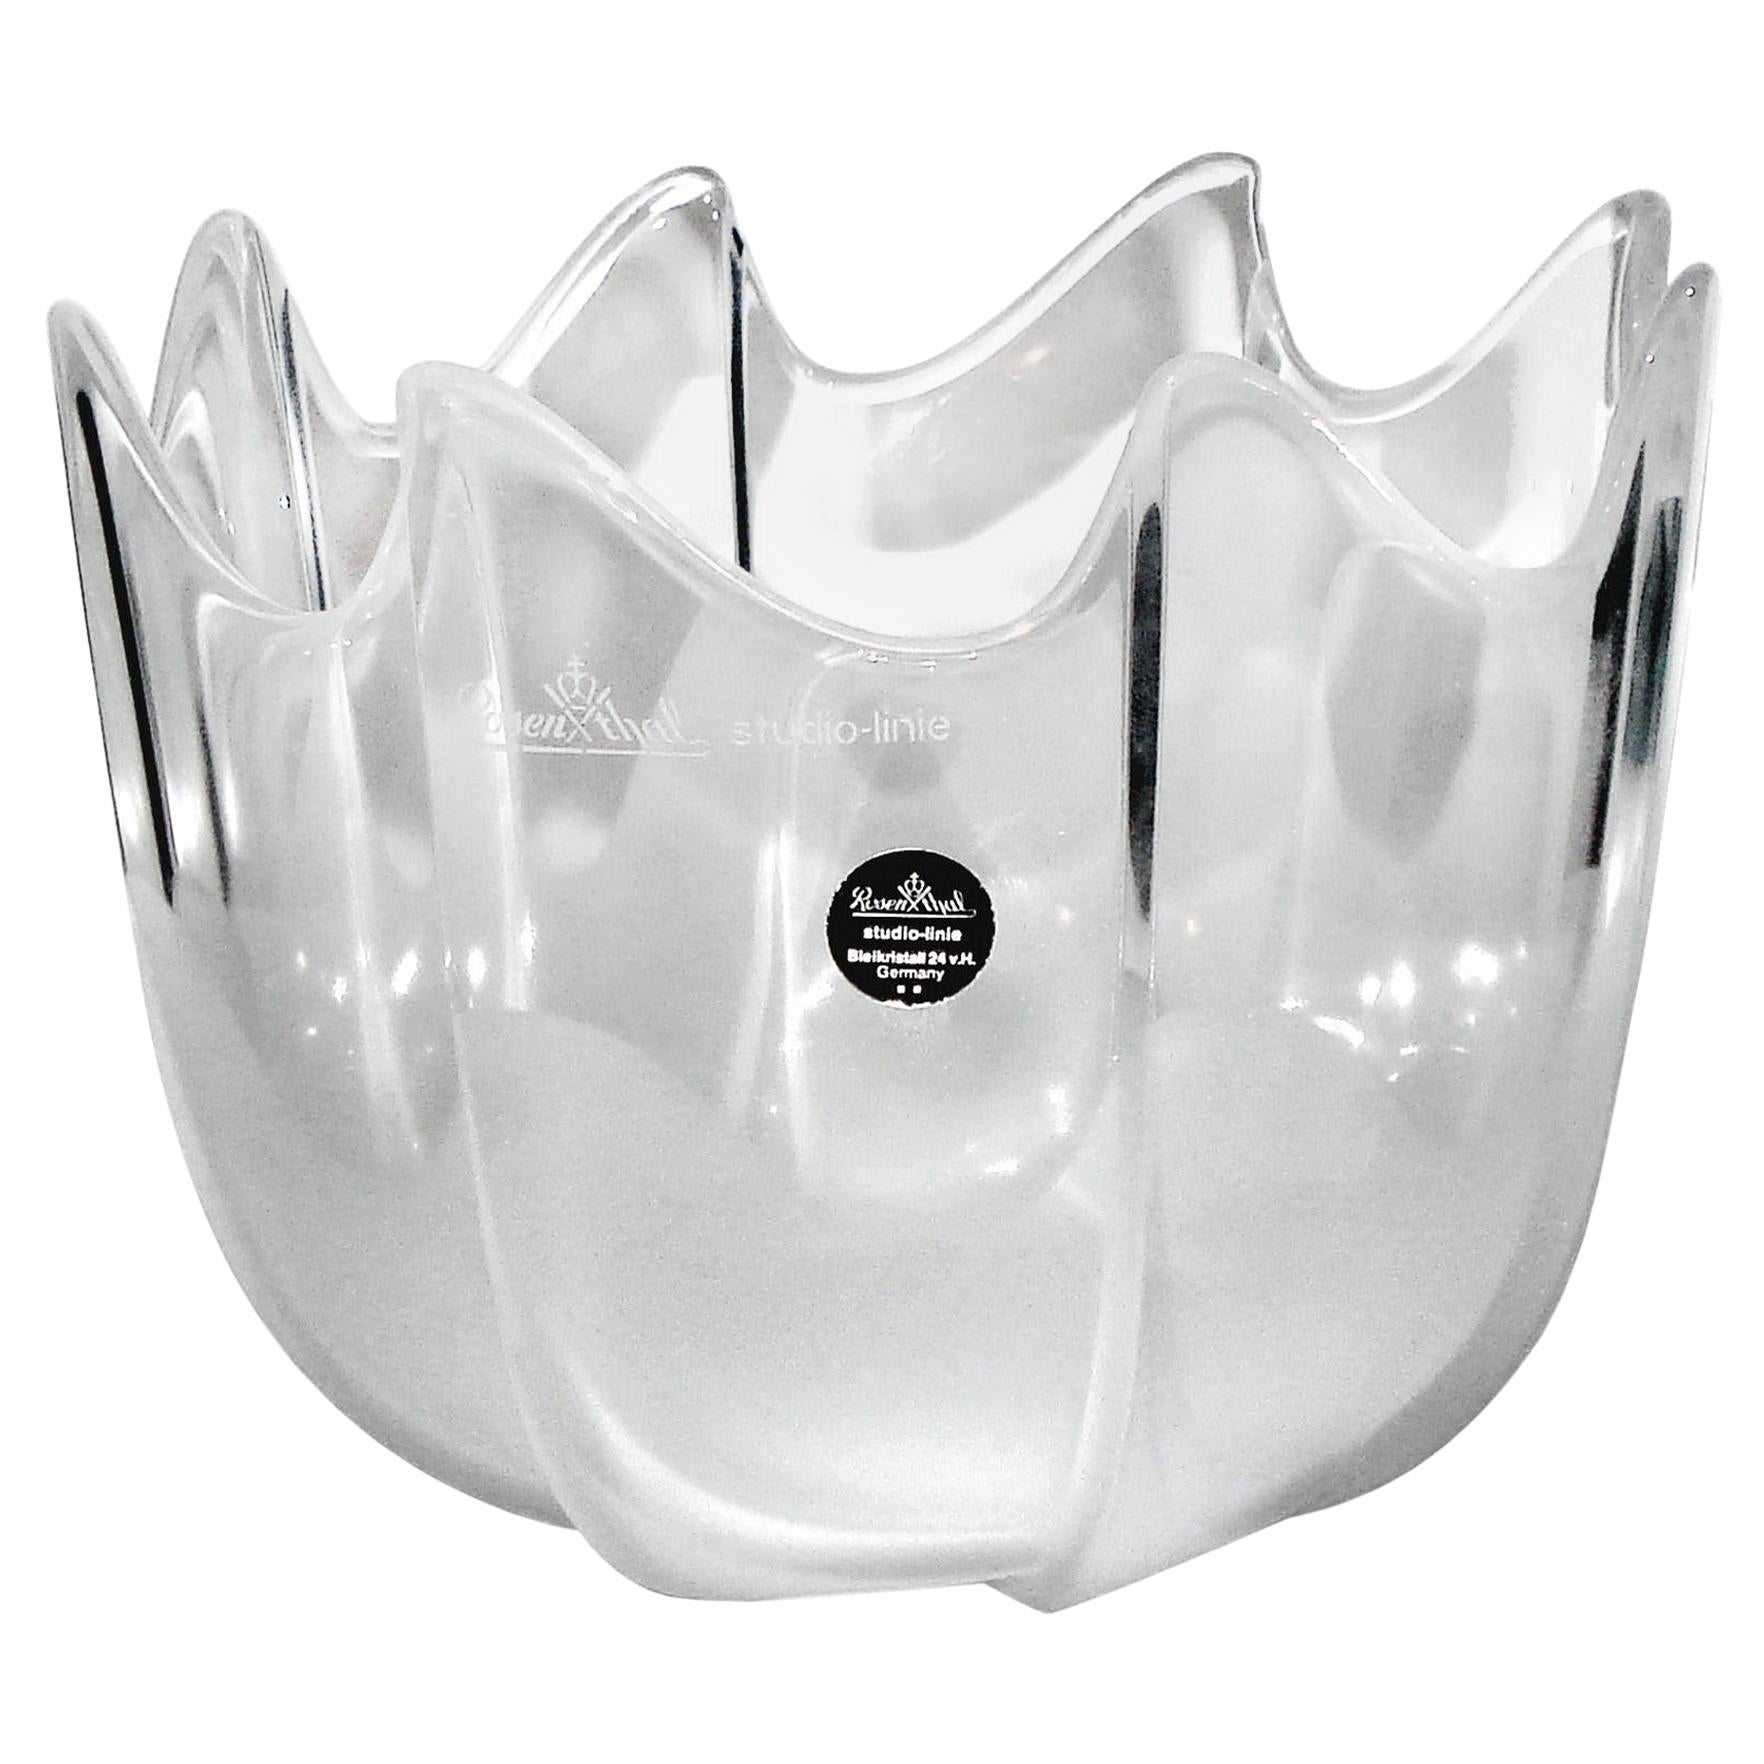 Rosenthal Studio-Linie Frosted Crystal Bowl For Sale